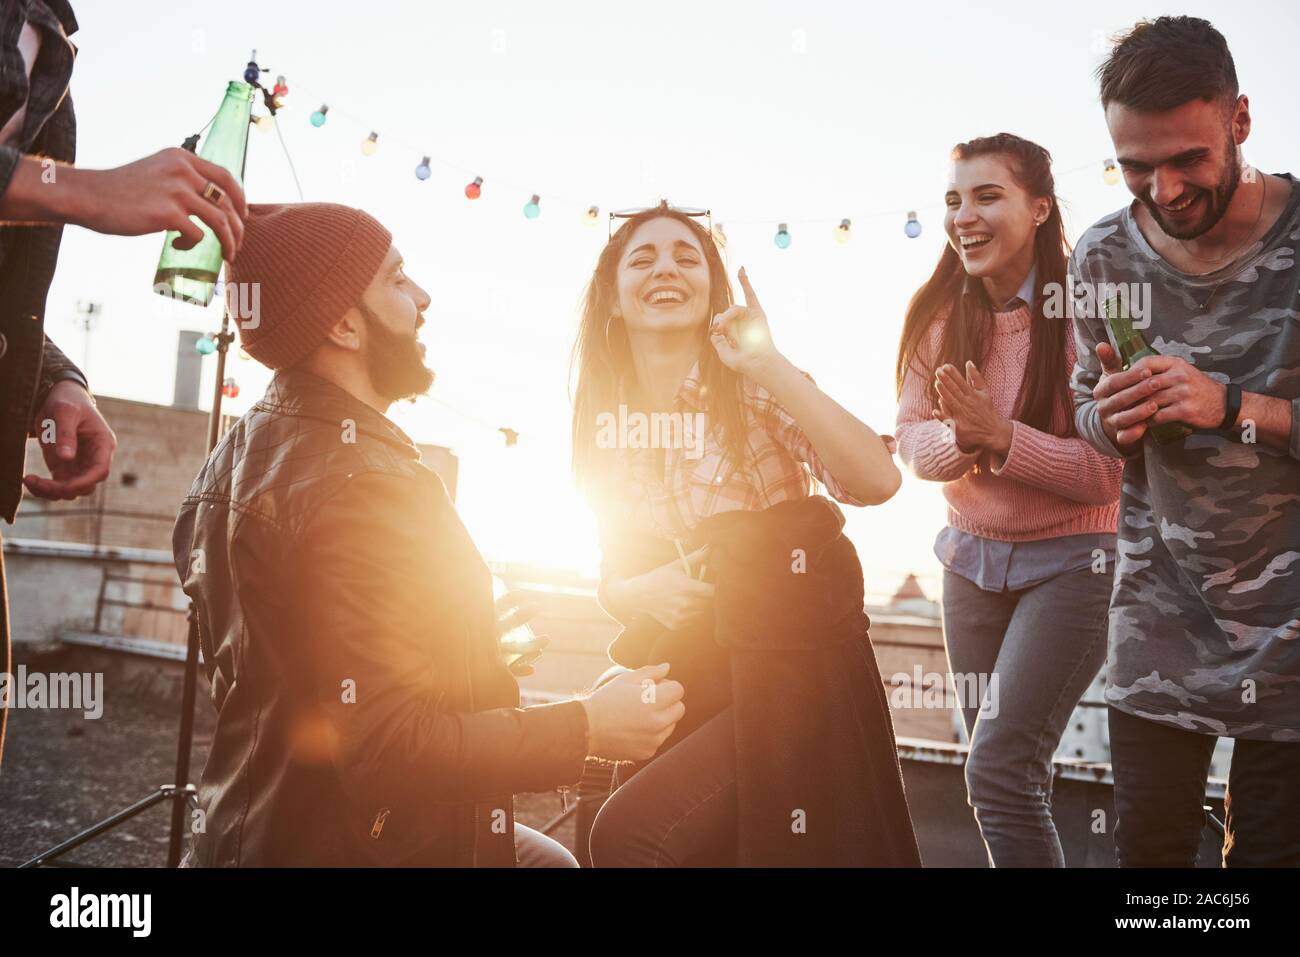 They only friends that joking around. Declaration of love on the rooftop with company of friends Stock Photo